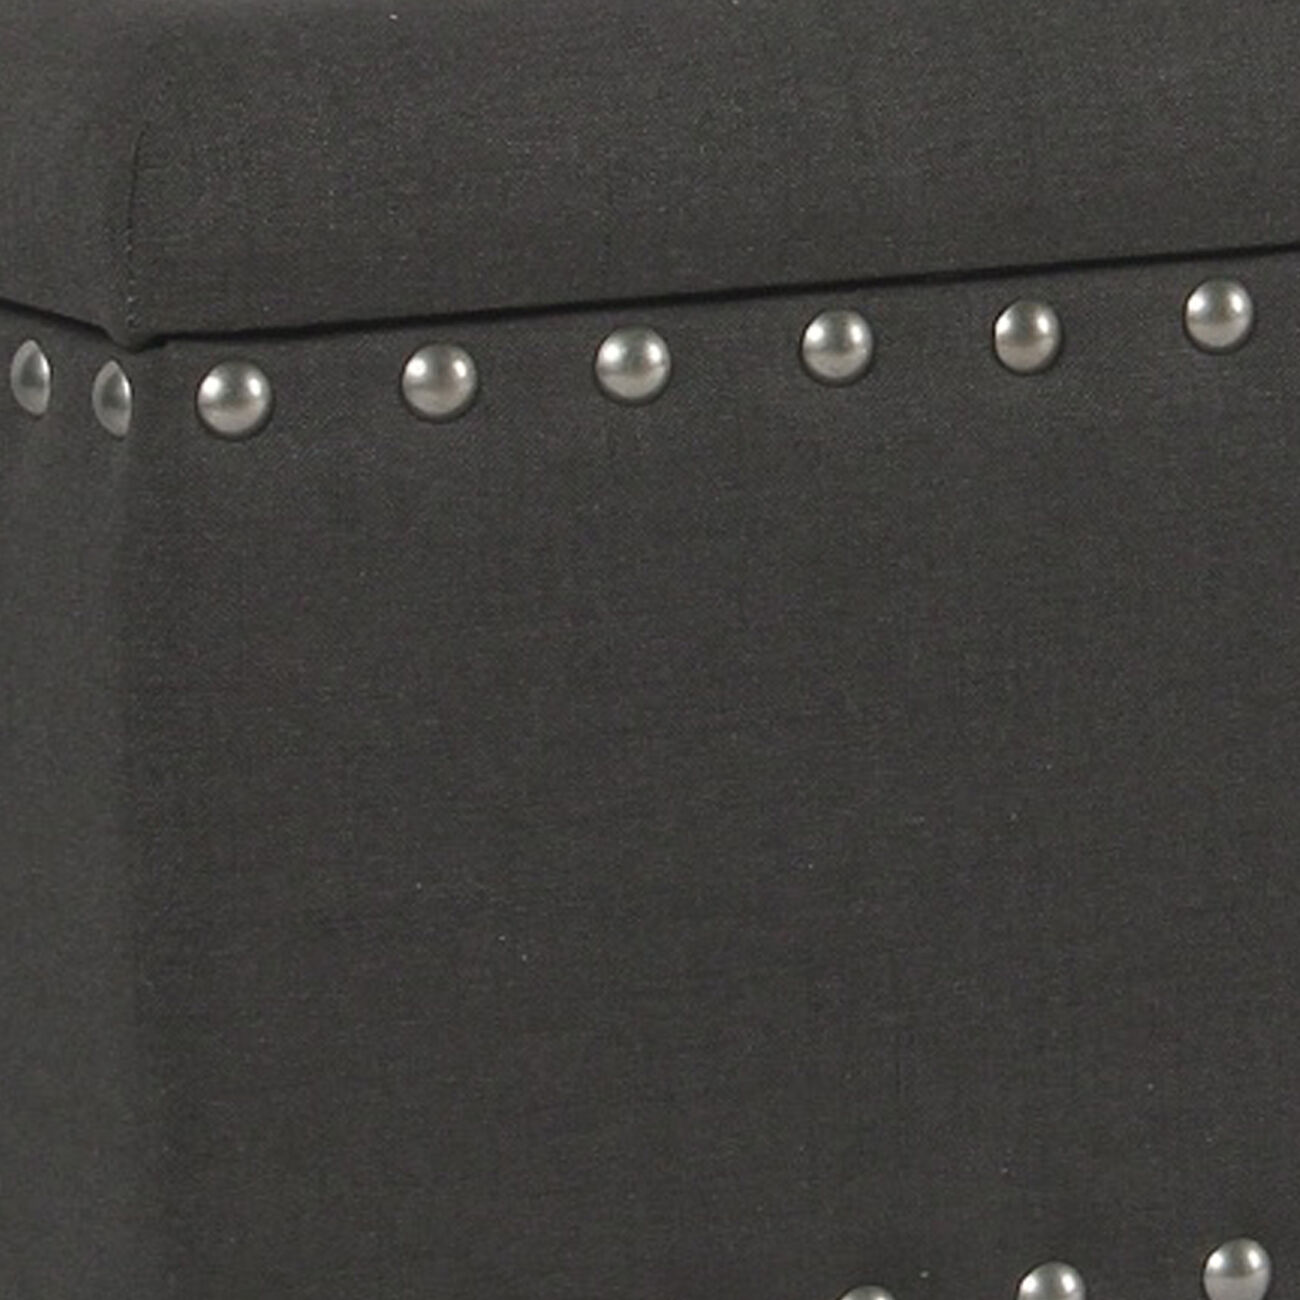 Fabric Upholstered Wooden Storage Bench With Nail head Trim, Large, Dark Gray and Brown